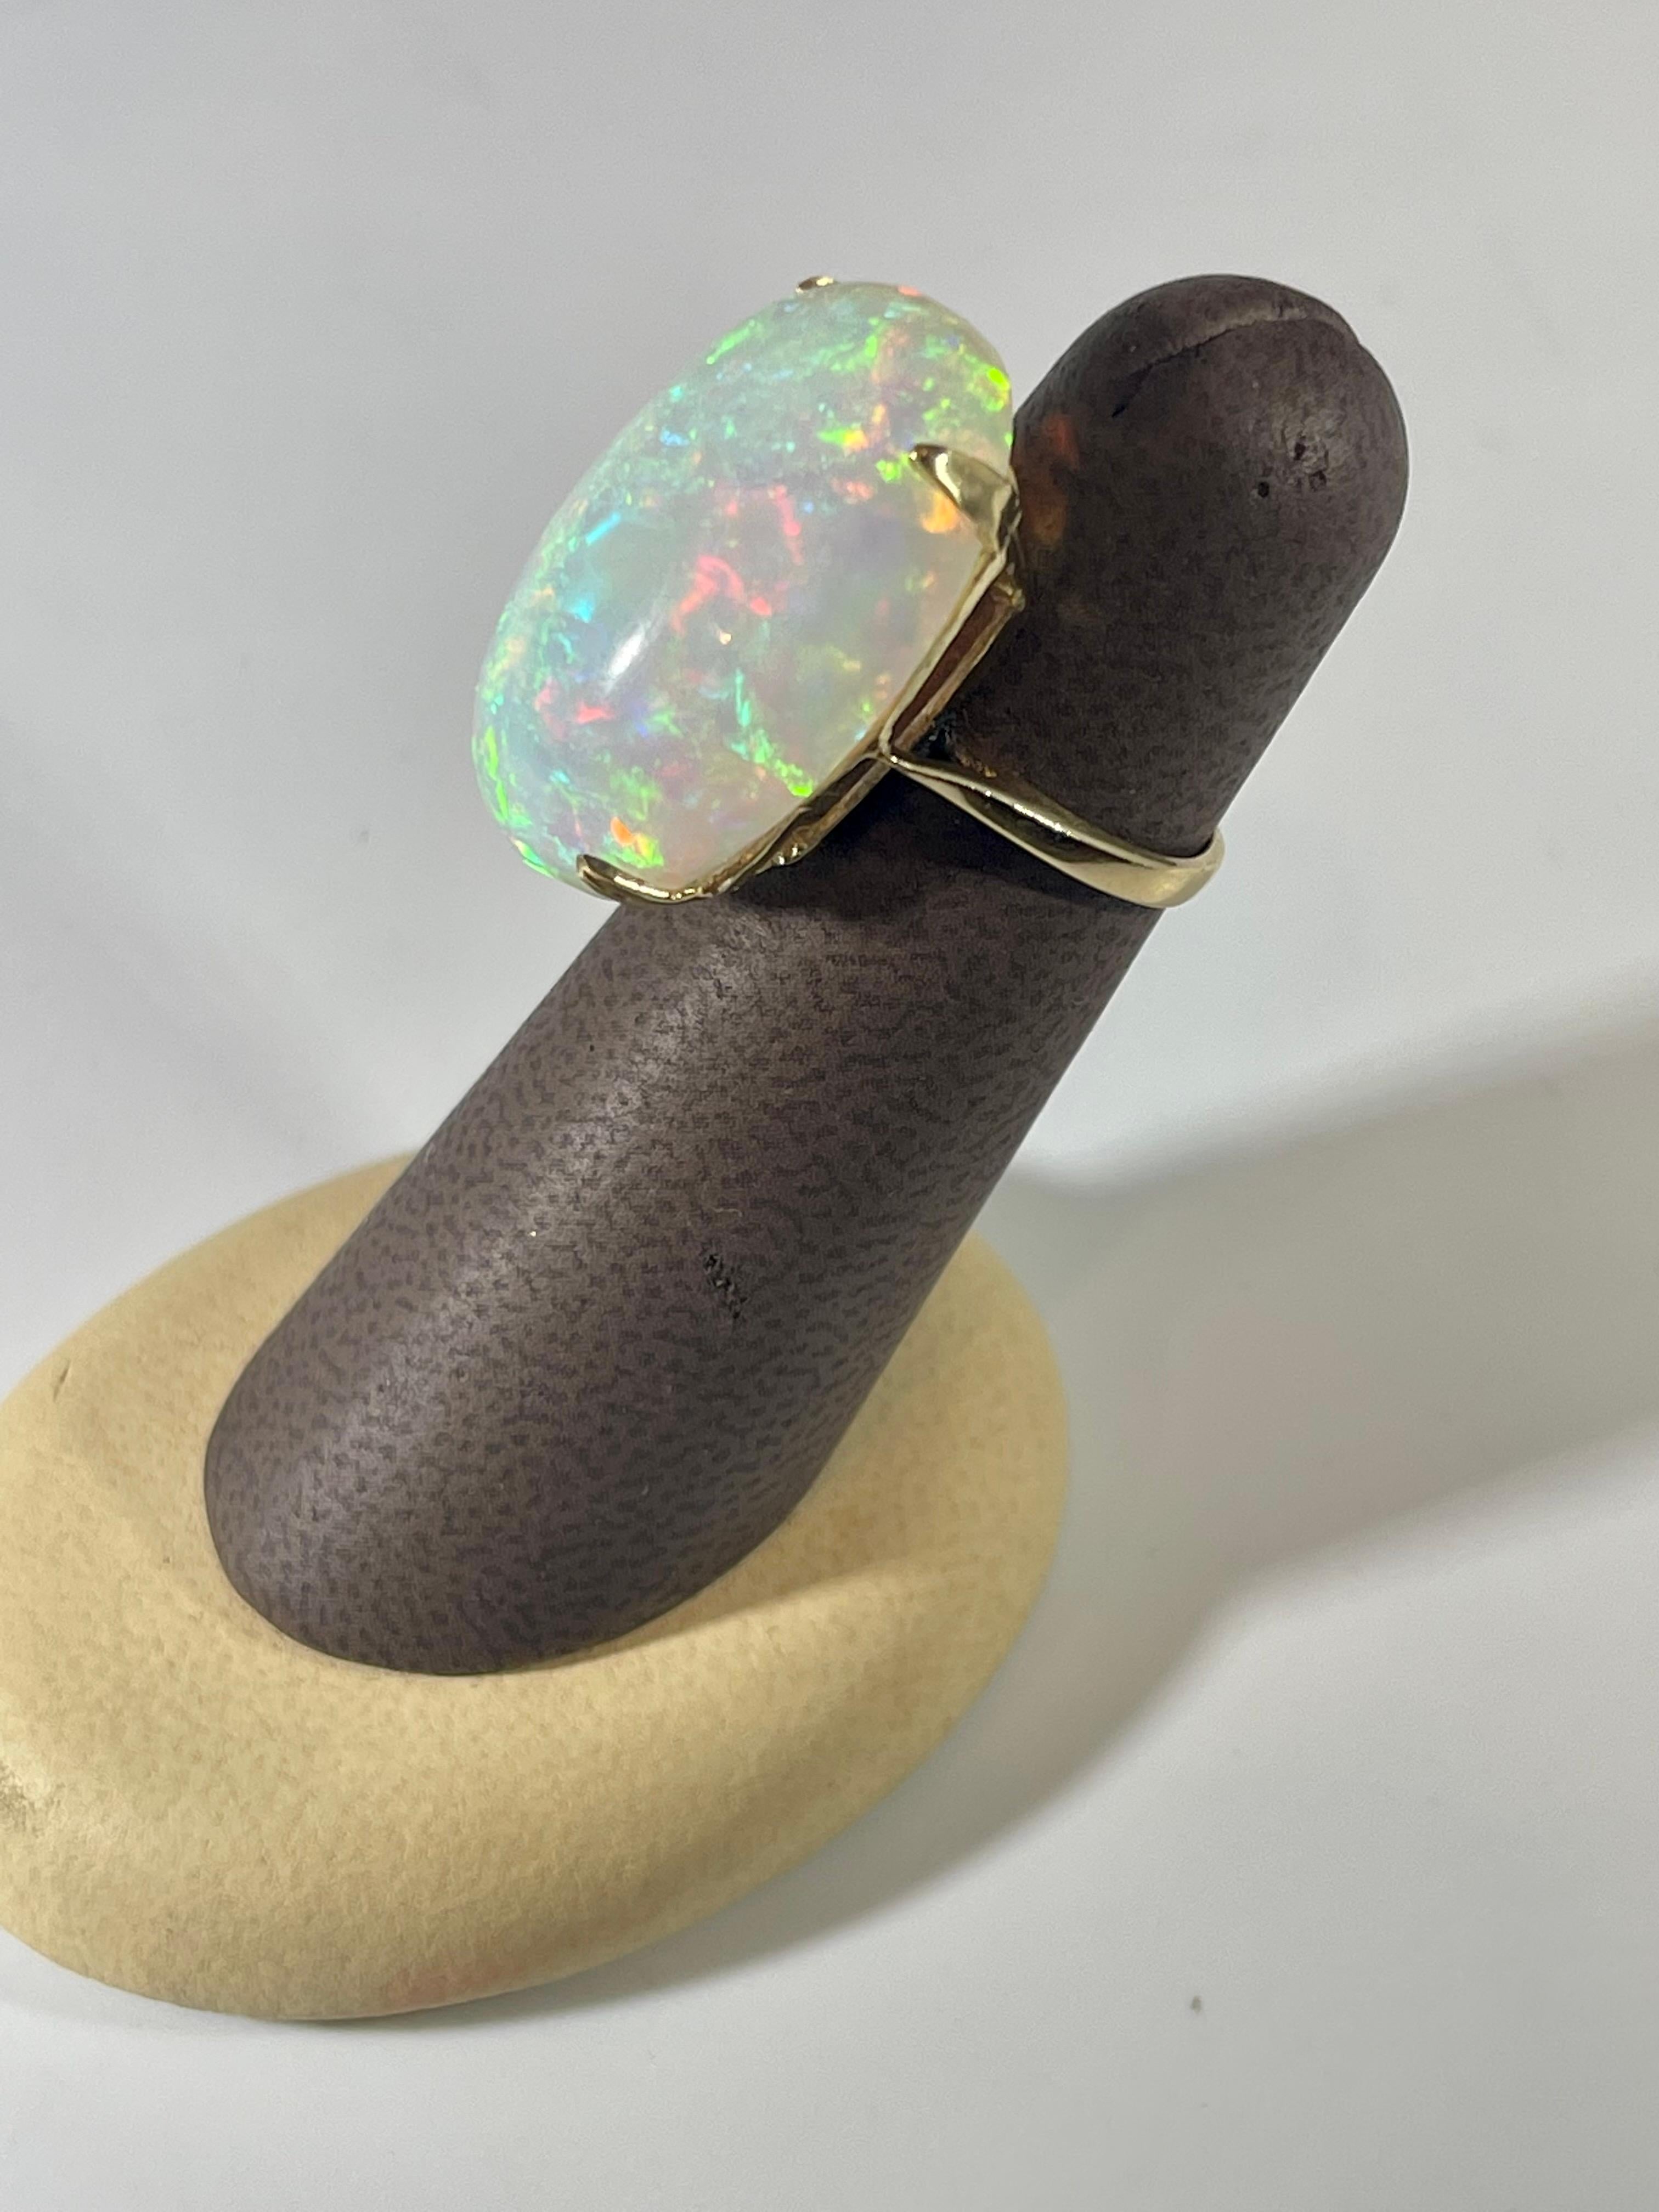 14 Carat Oval Shape Ethiopian Opal Cocktail Ring 14 Karat Yellow Gold For Sale 4